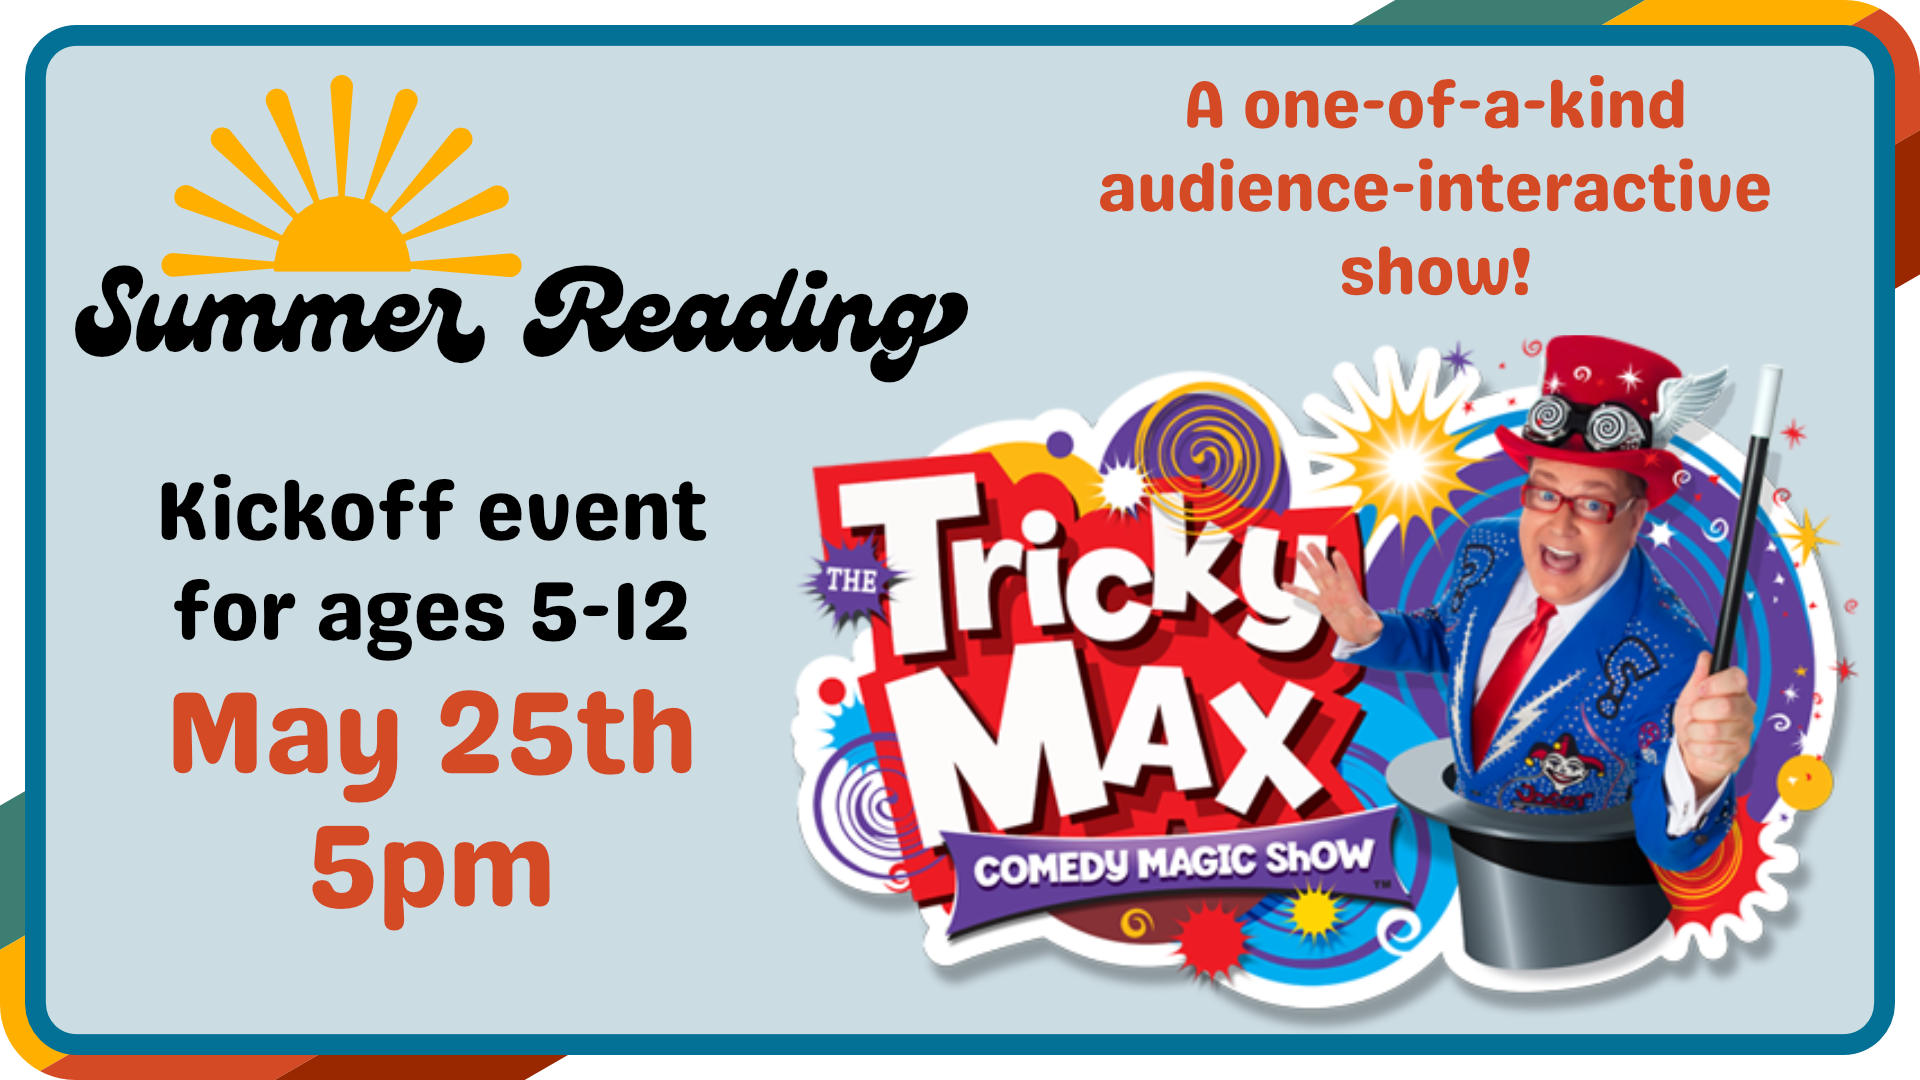 Summer Reading kickoff May 25th, featuring the Tricky Max Comedy Magic Show for ages 5-12